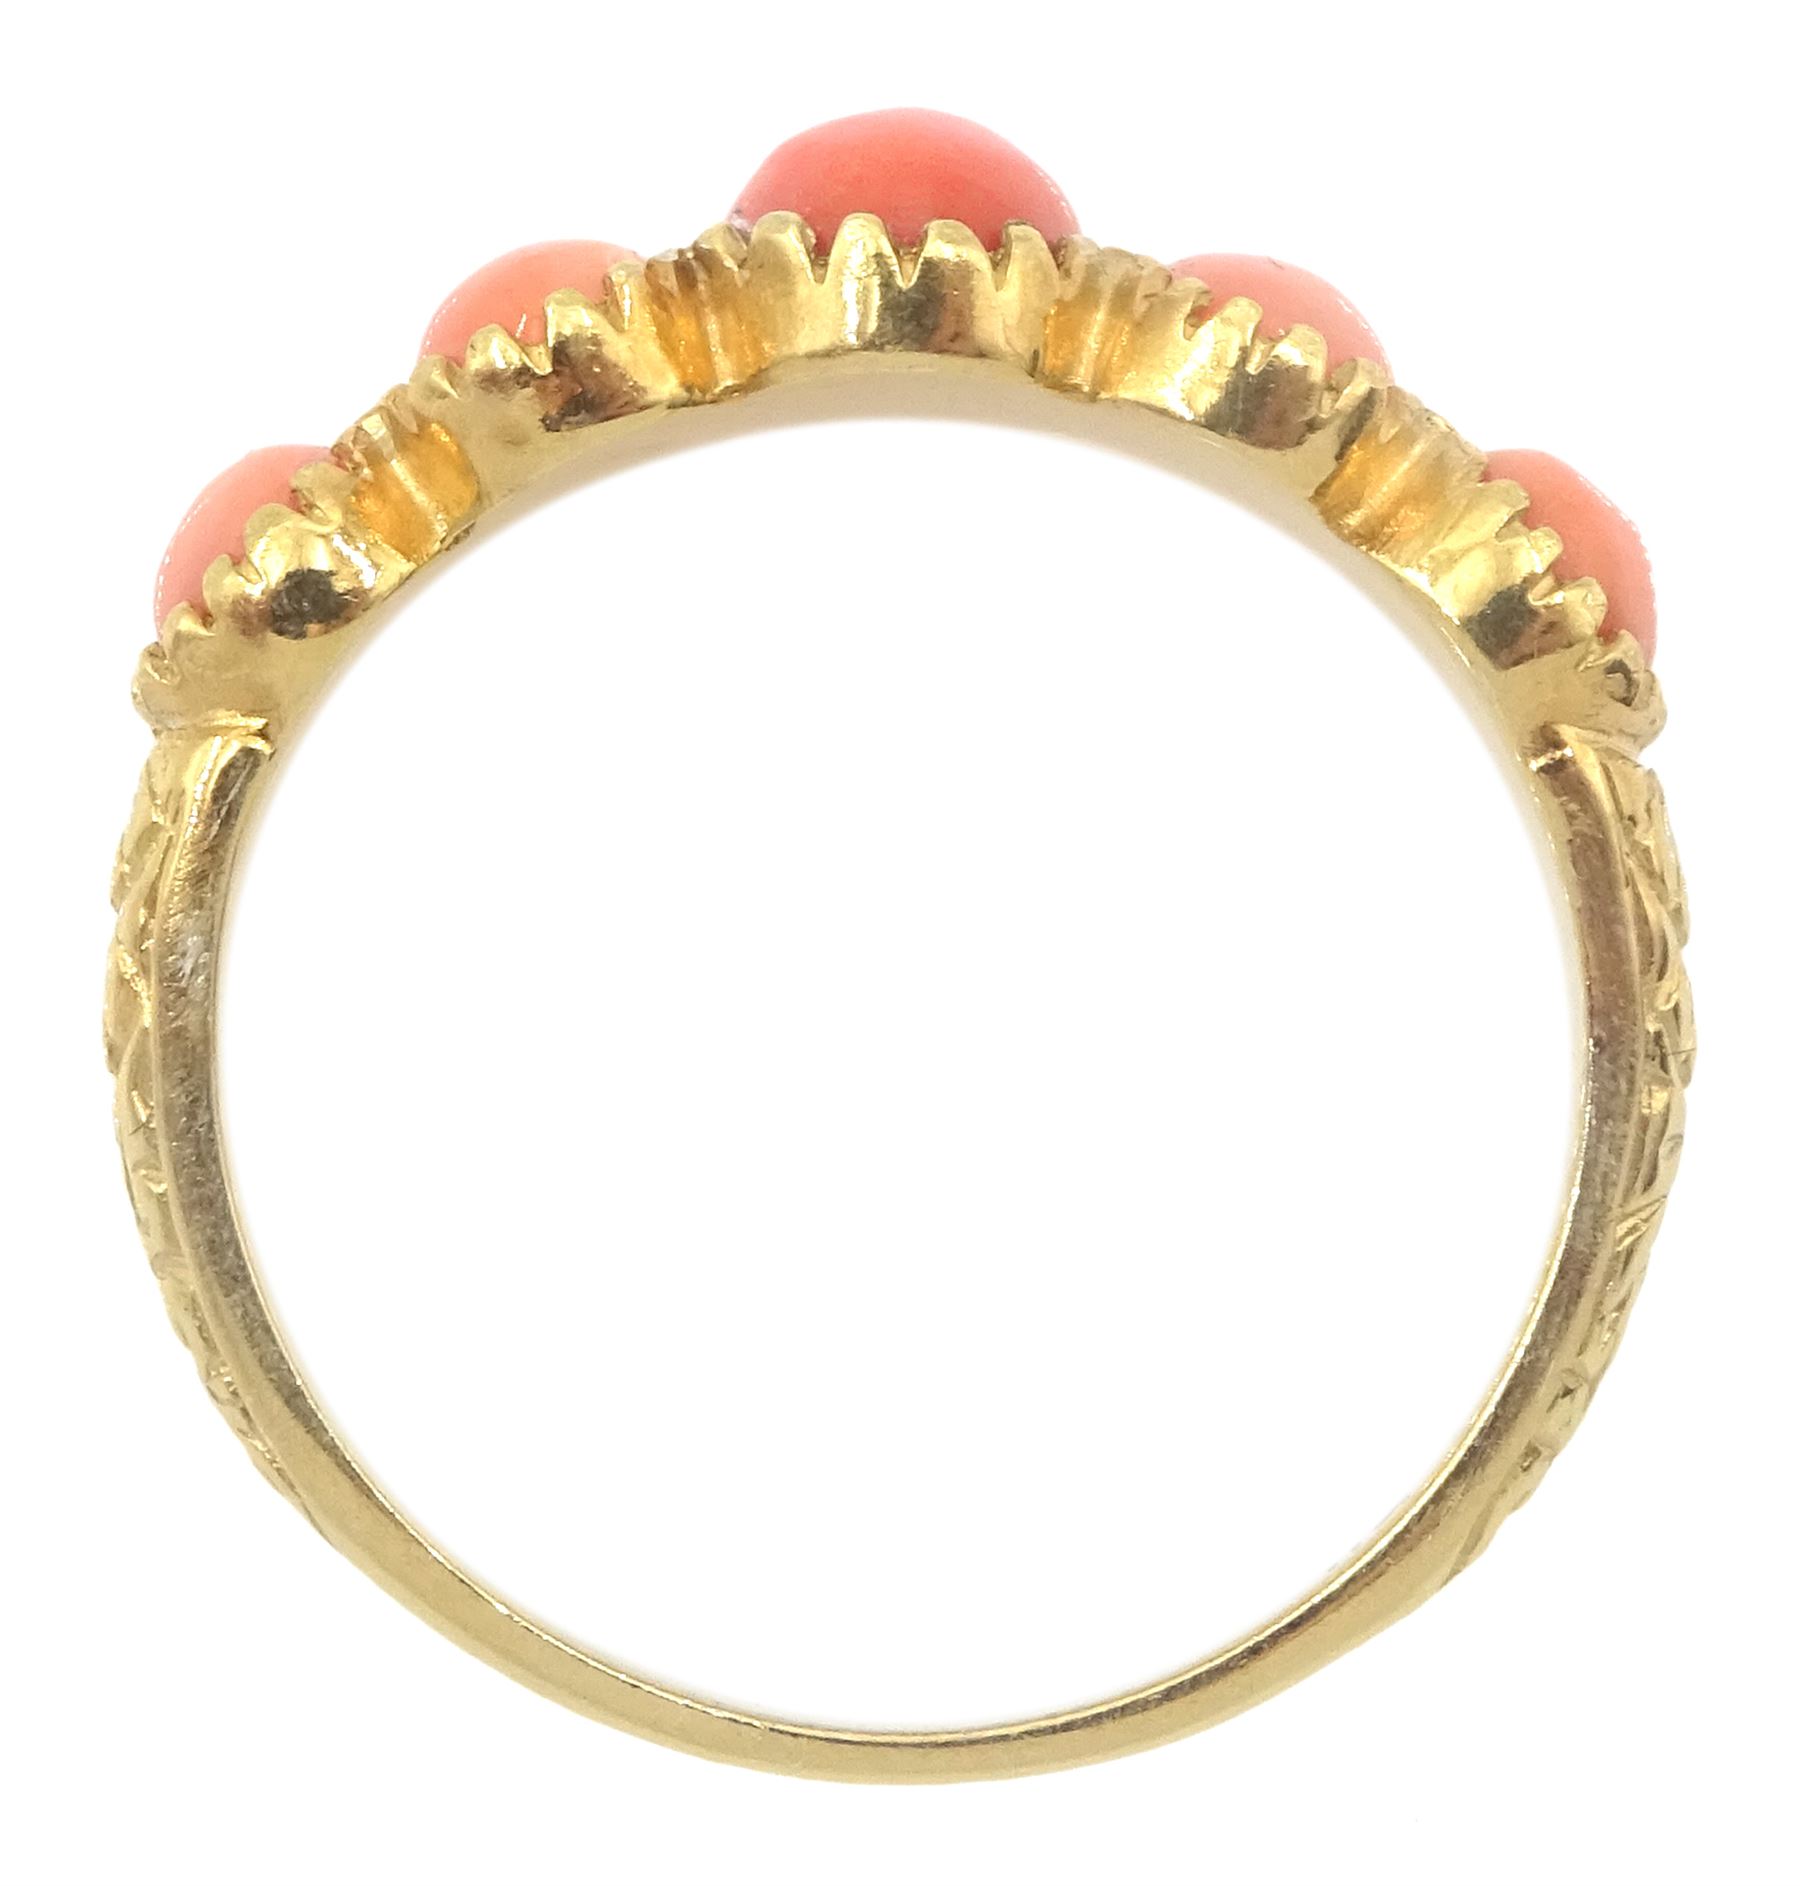 Silver-gilt five stone coral ring - Image 4 of 4